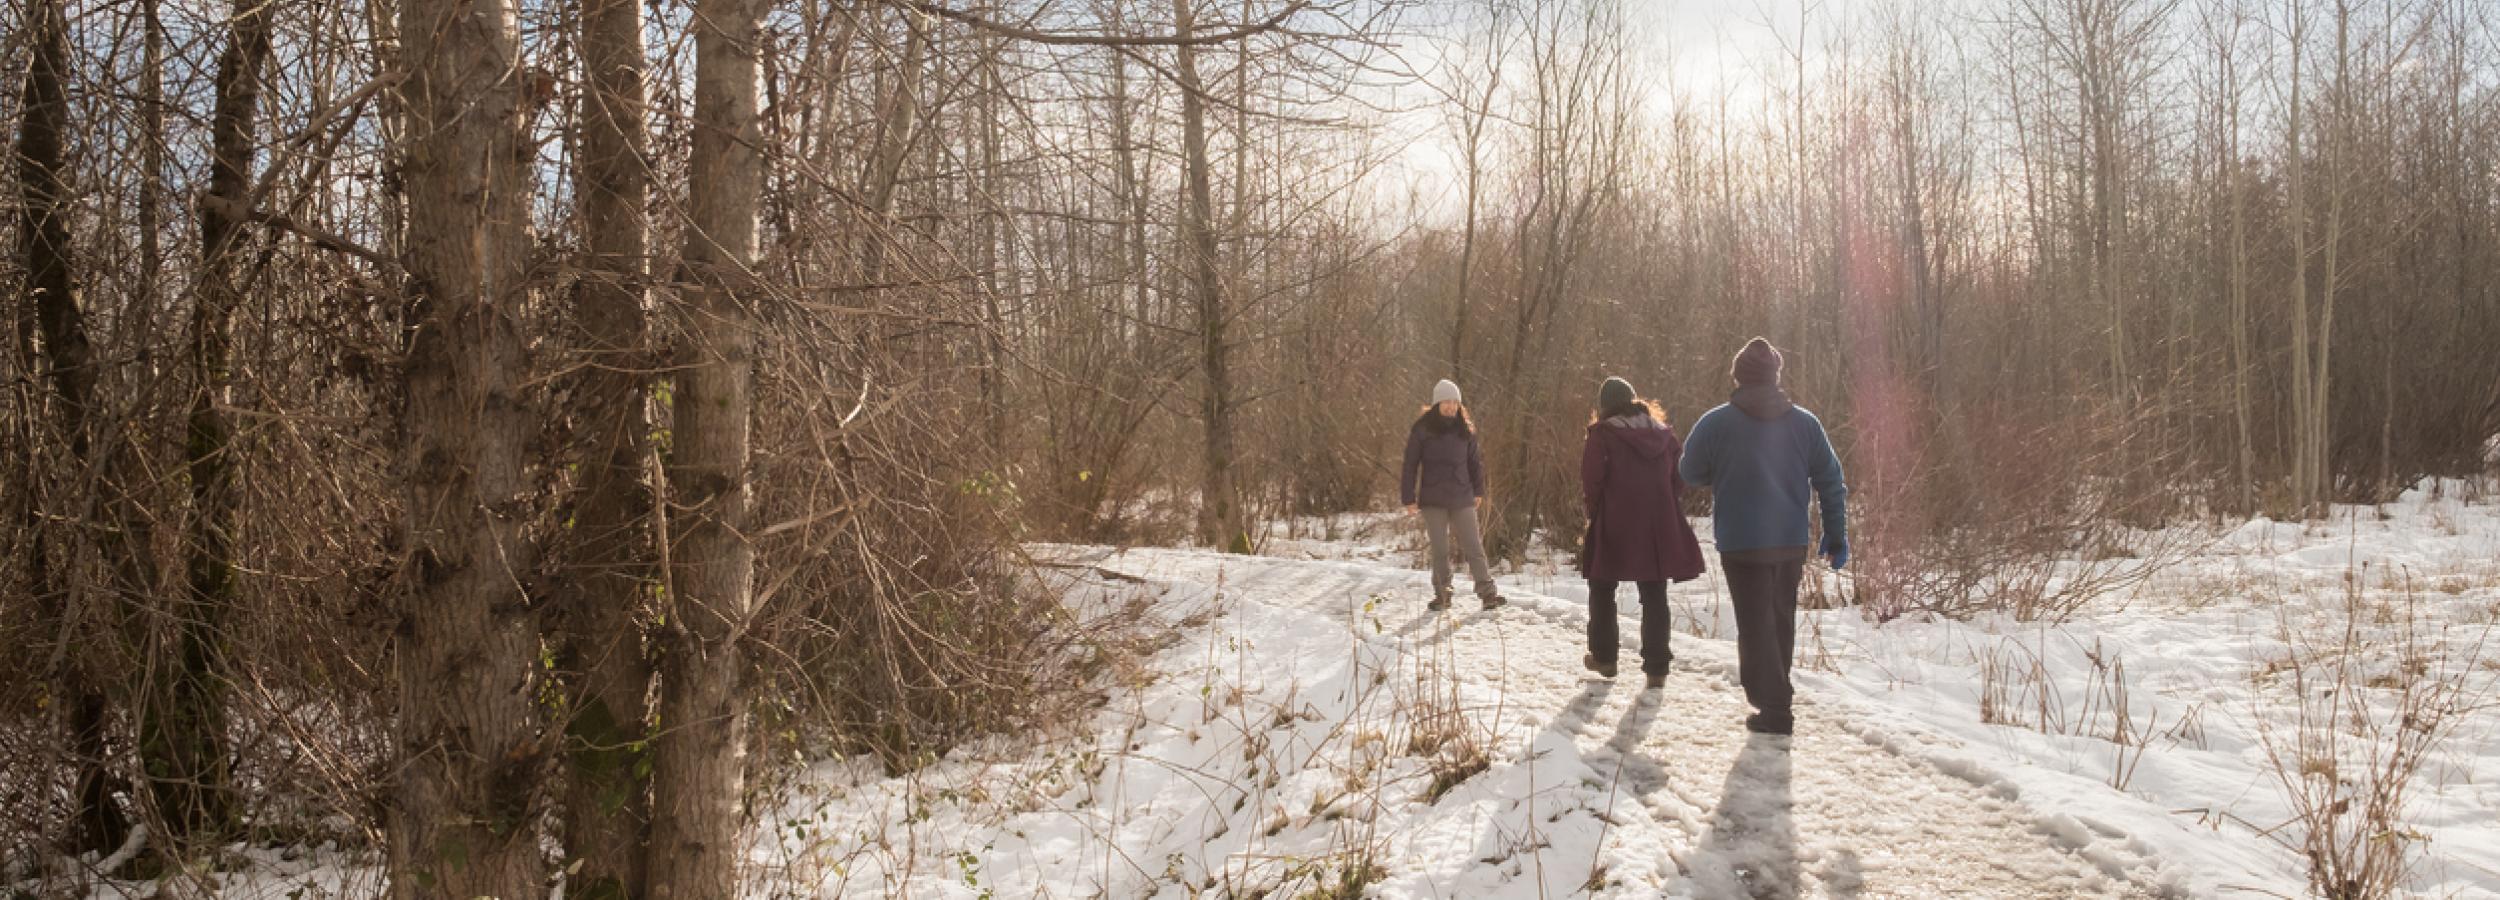 people walk along a trail during winter